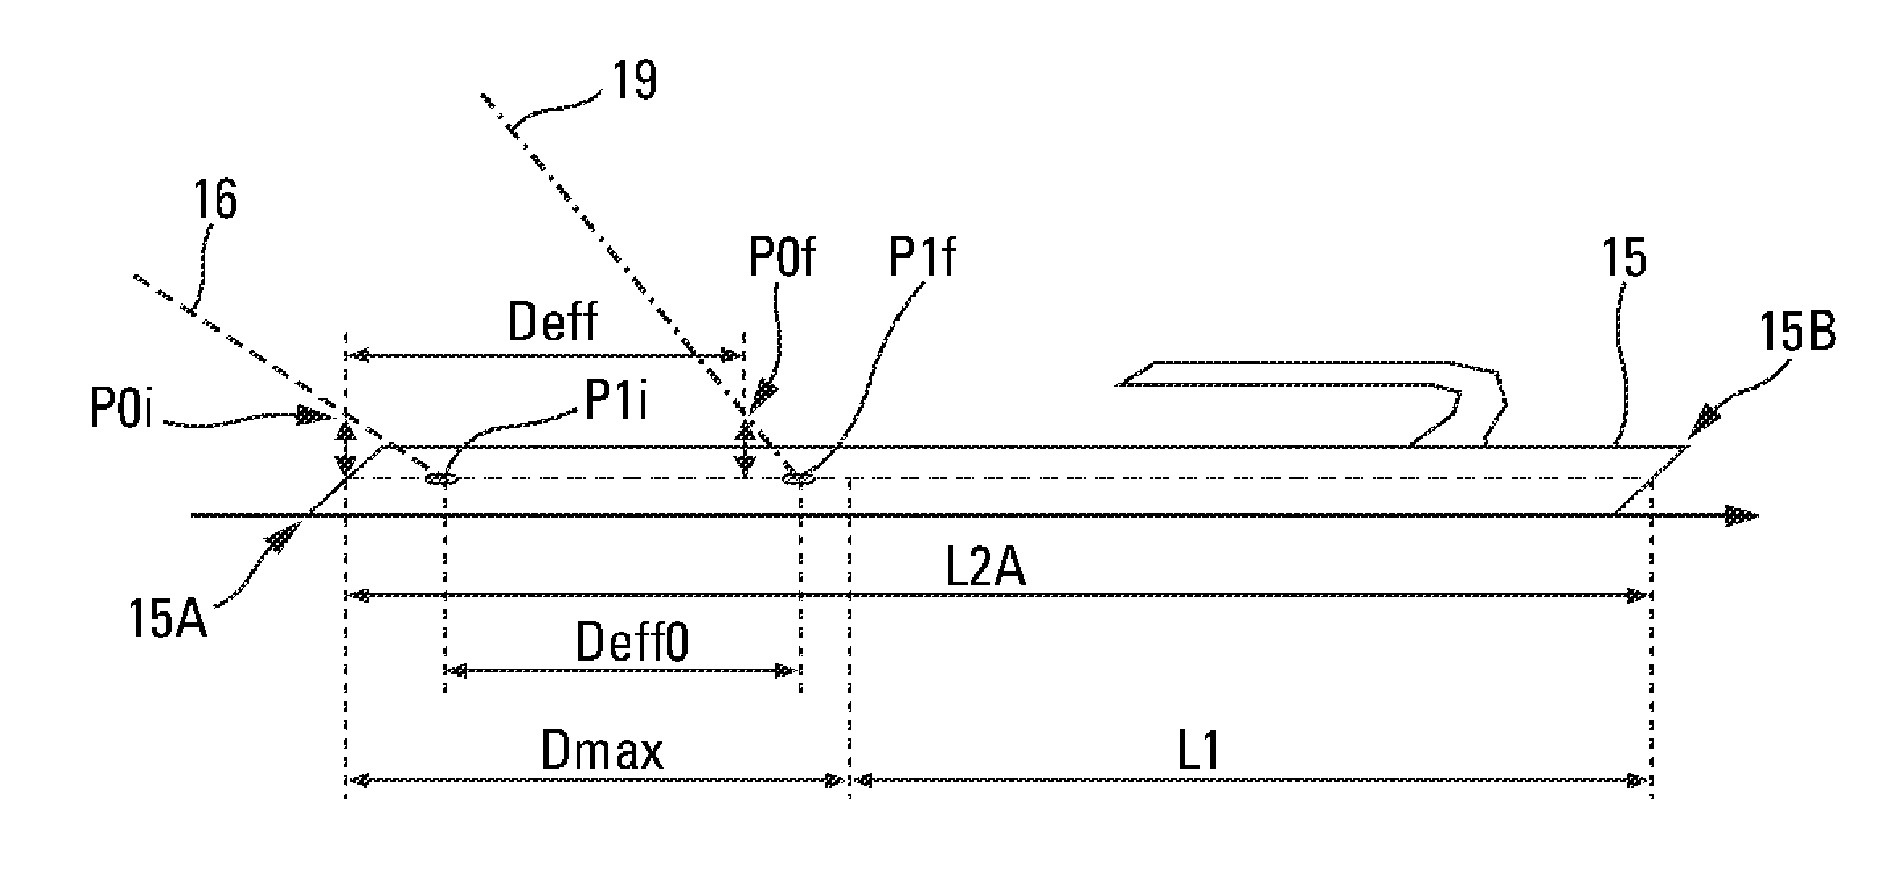 Method and device for assisted flight management of aircraft during landing phase